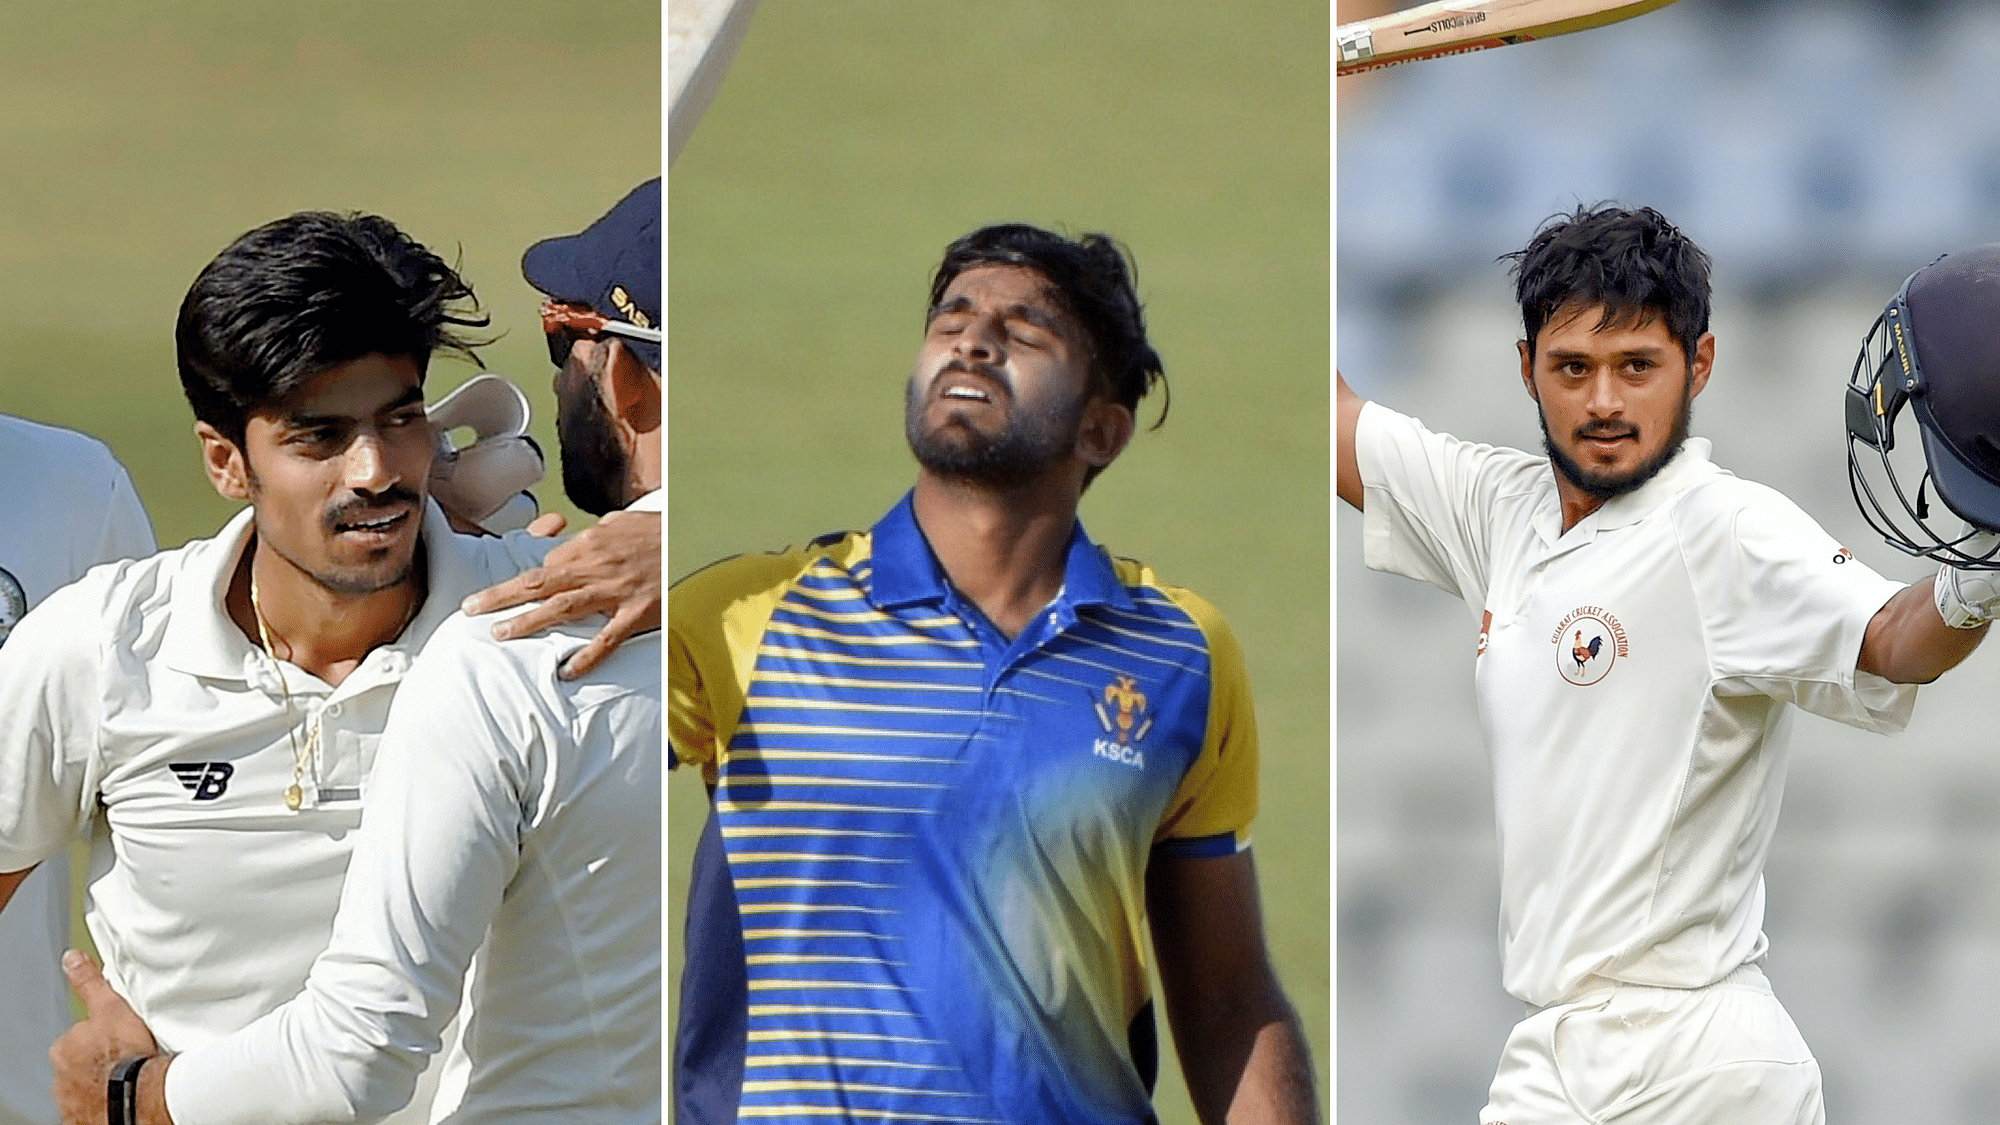 Ten Indian cricketers who have done well in domestic cricket and could make it big in the IPL auction.